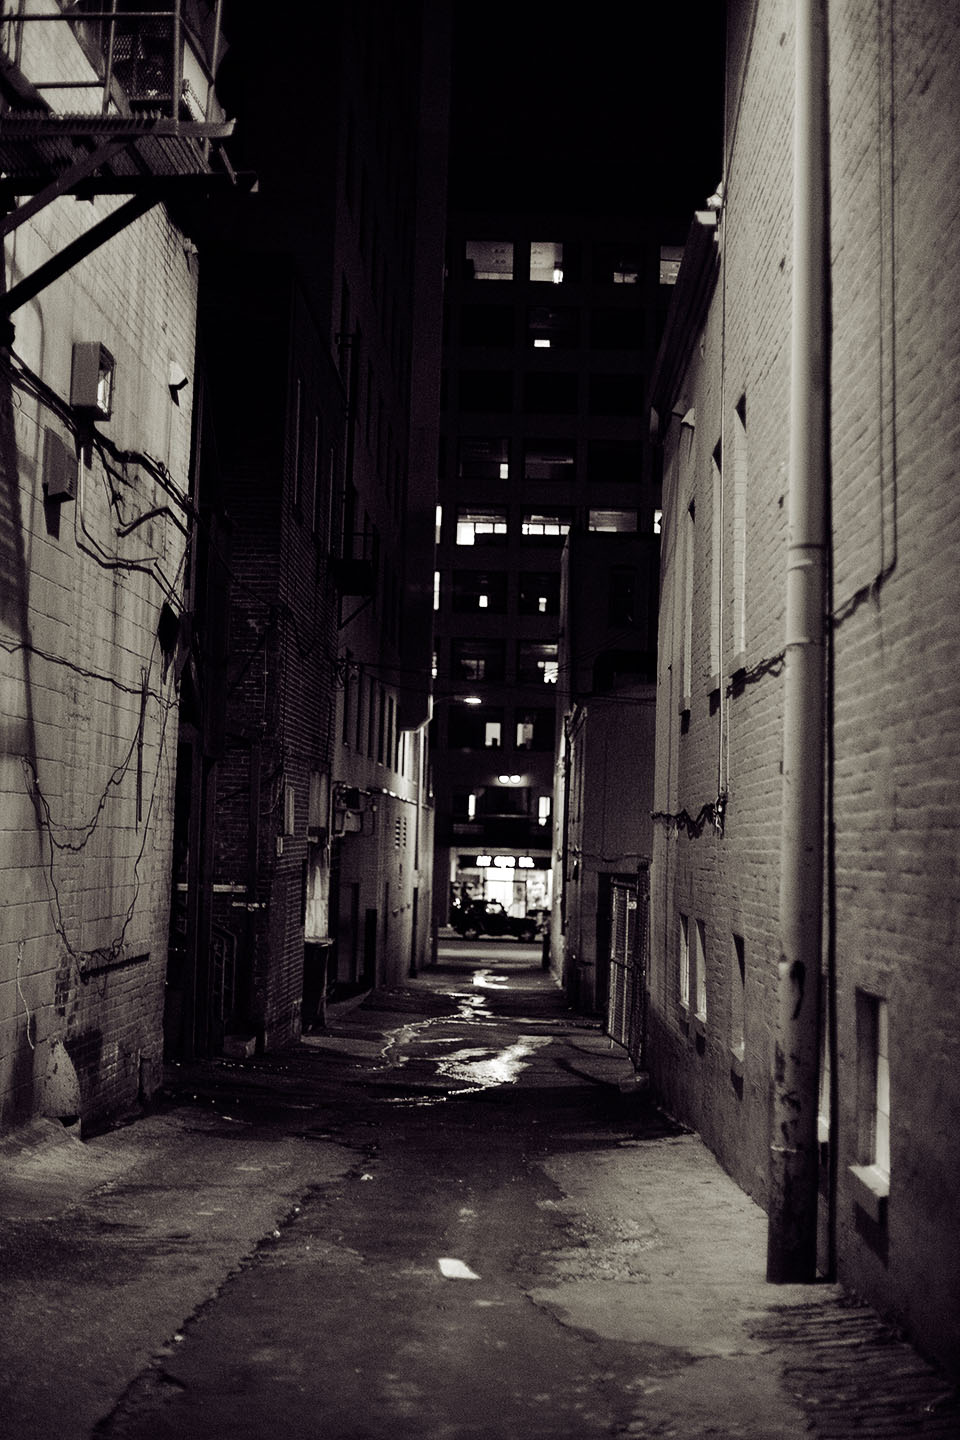 an alley with the building lights on, and buildings partially obscured in shadows